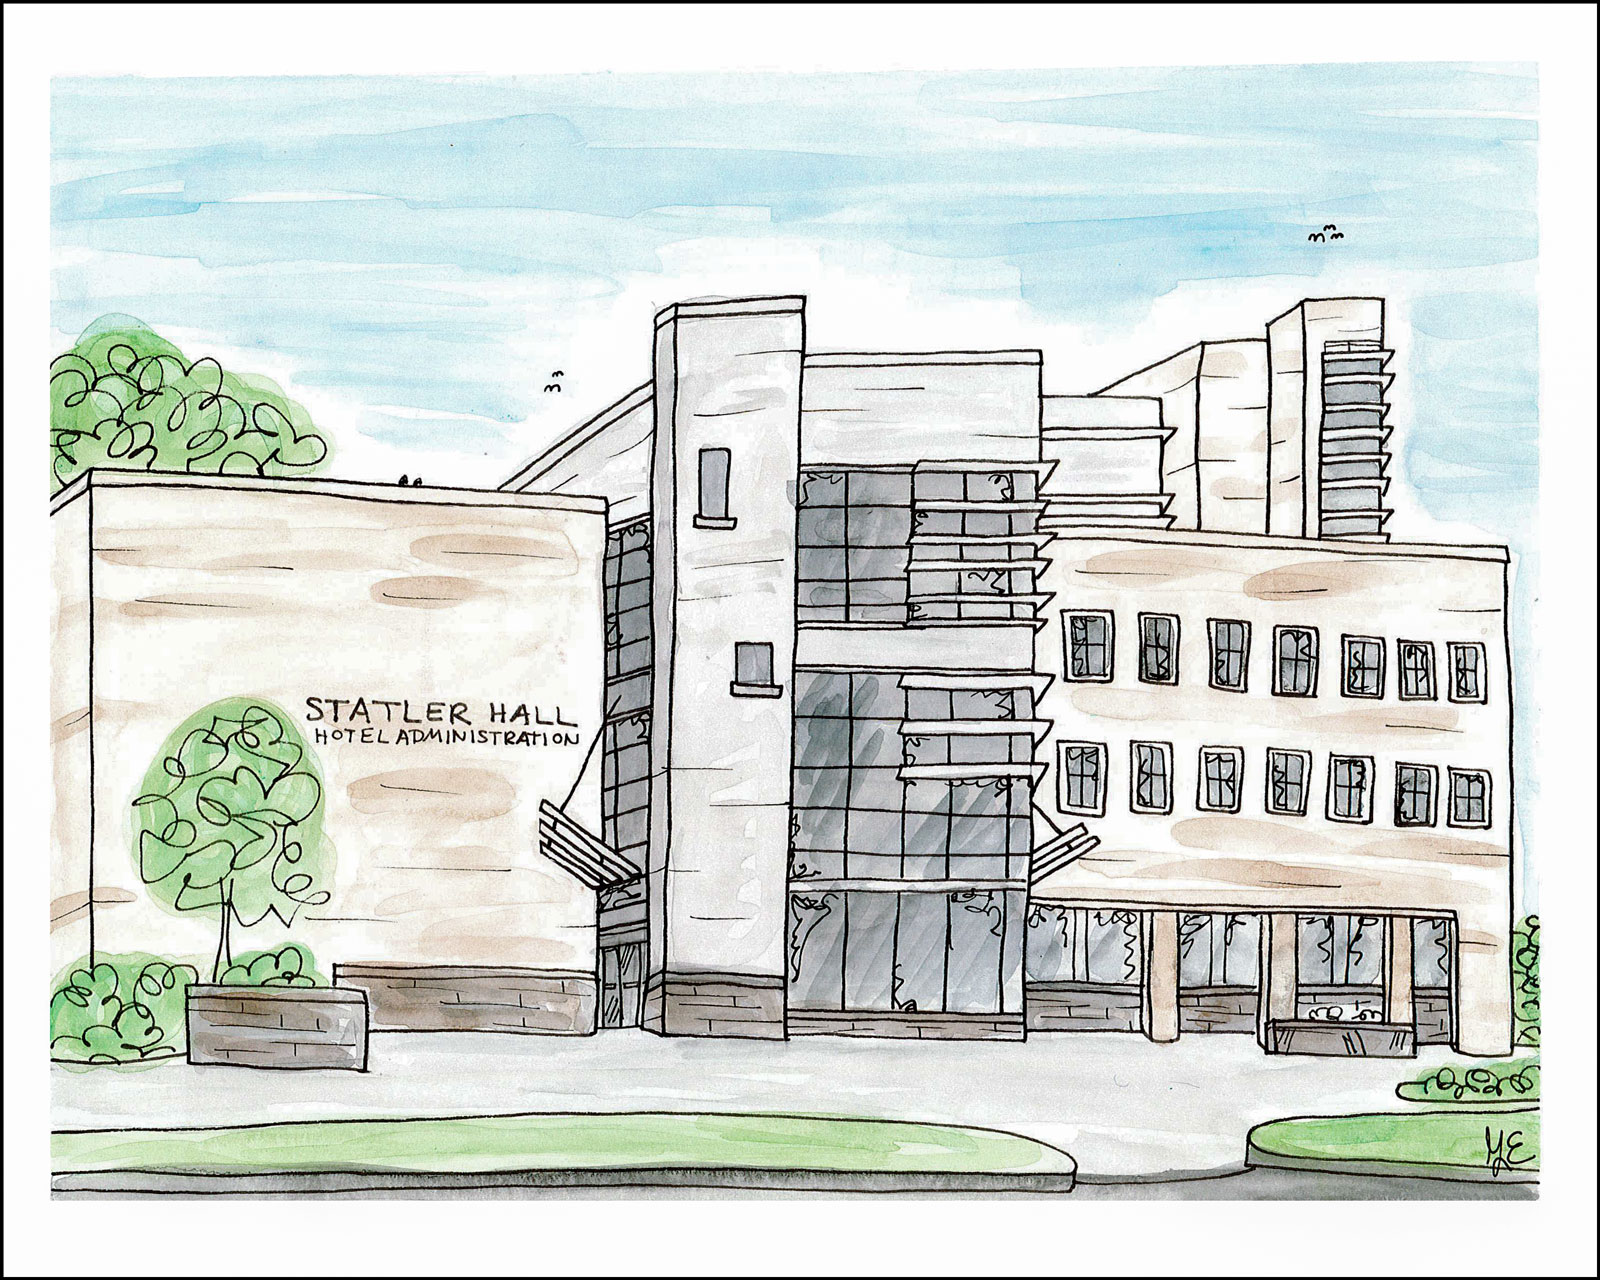 A drawing of Statler Hall